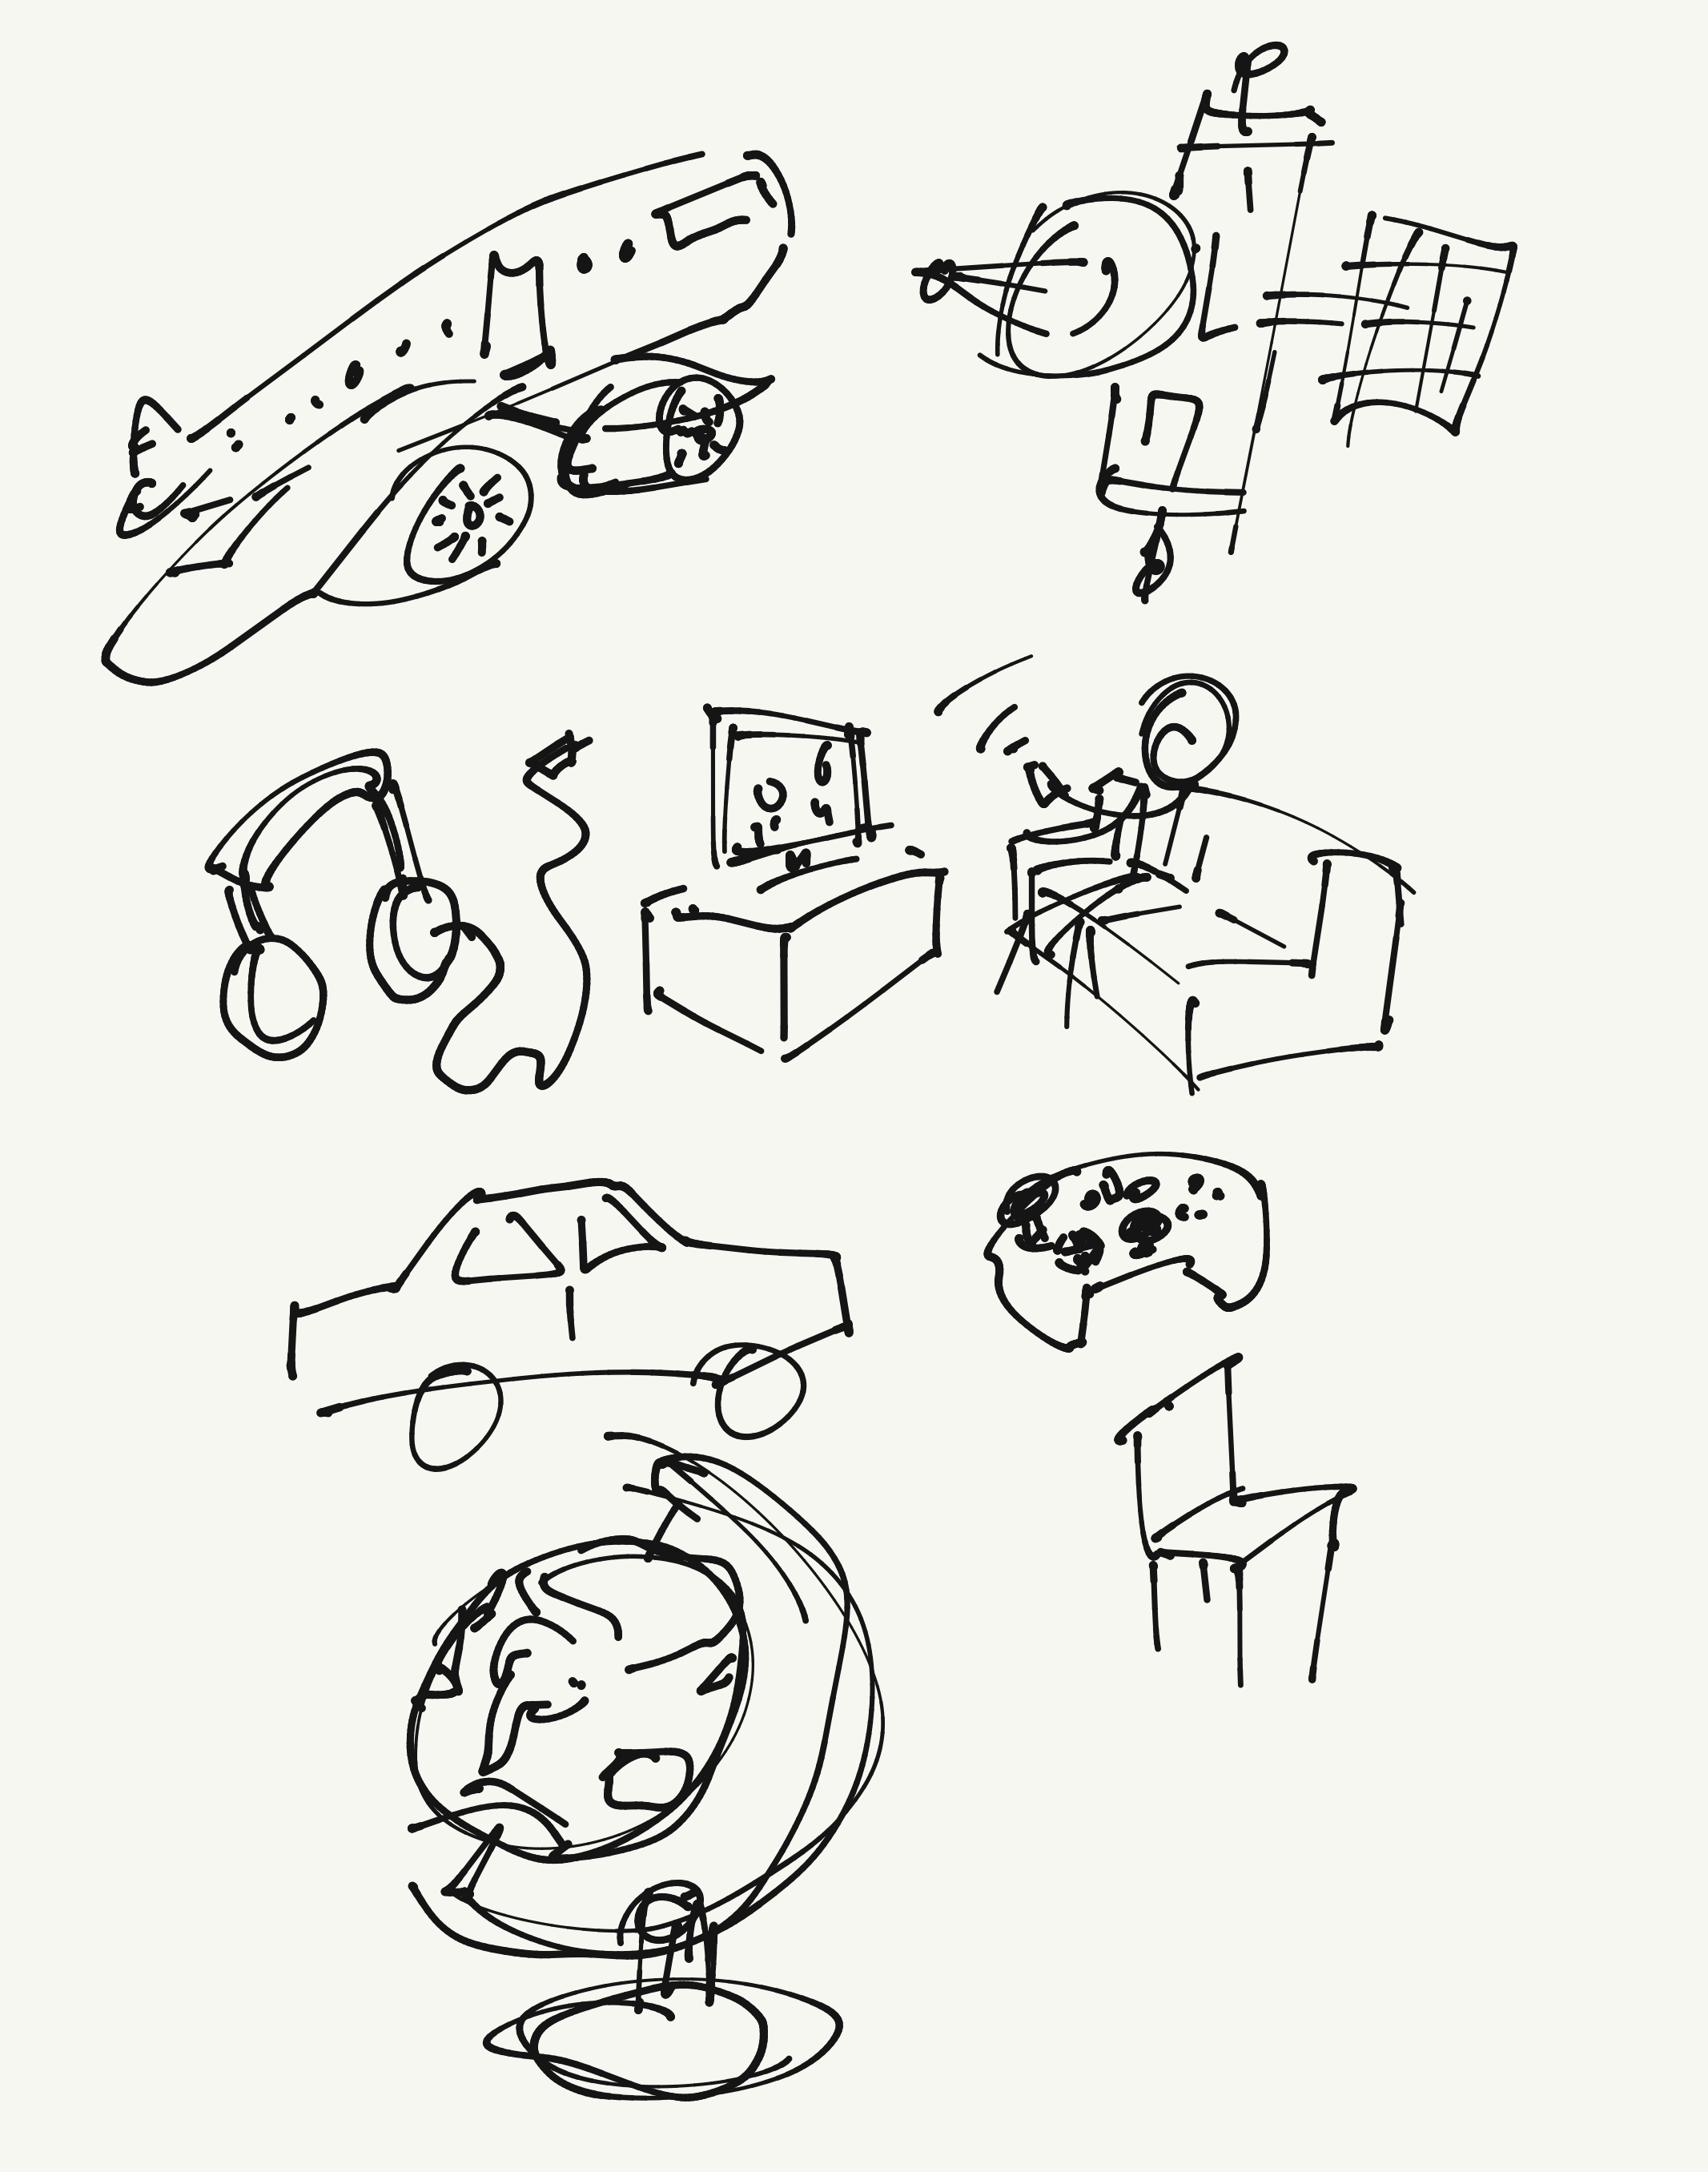 Doodle Catalog 3 - lots of sketches drawings quick visual storytelling note taking examples and ideas 2.png